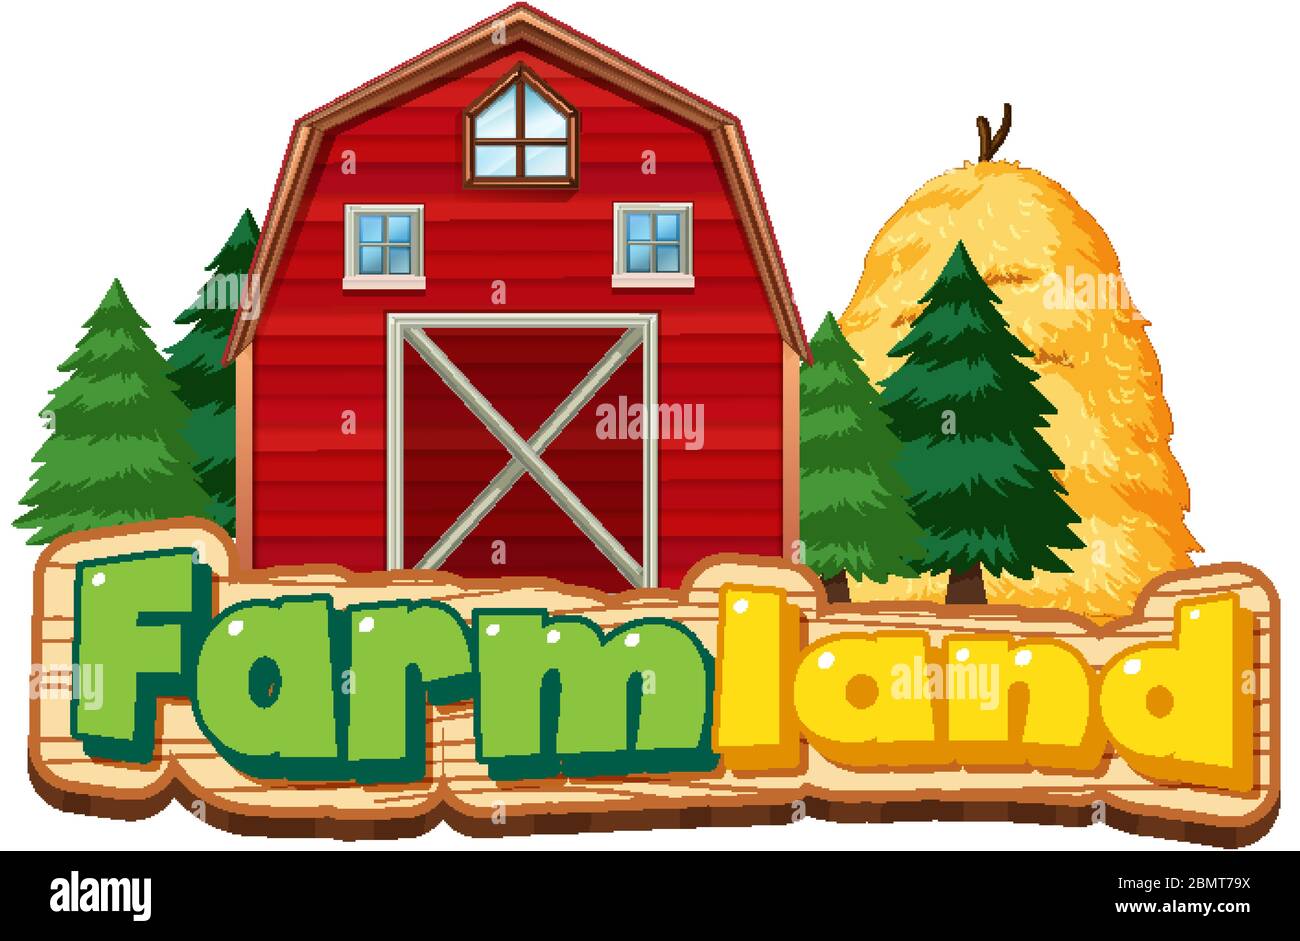 Farmland sign with red barn and haystack illustration Stock Vector